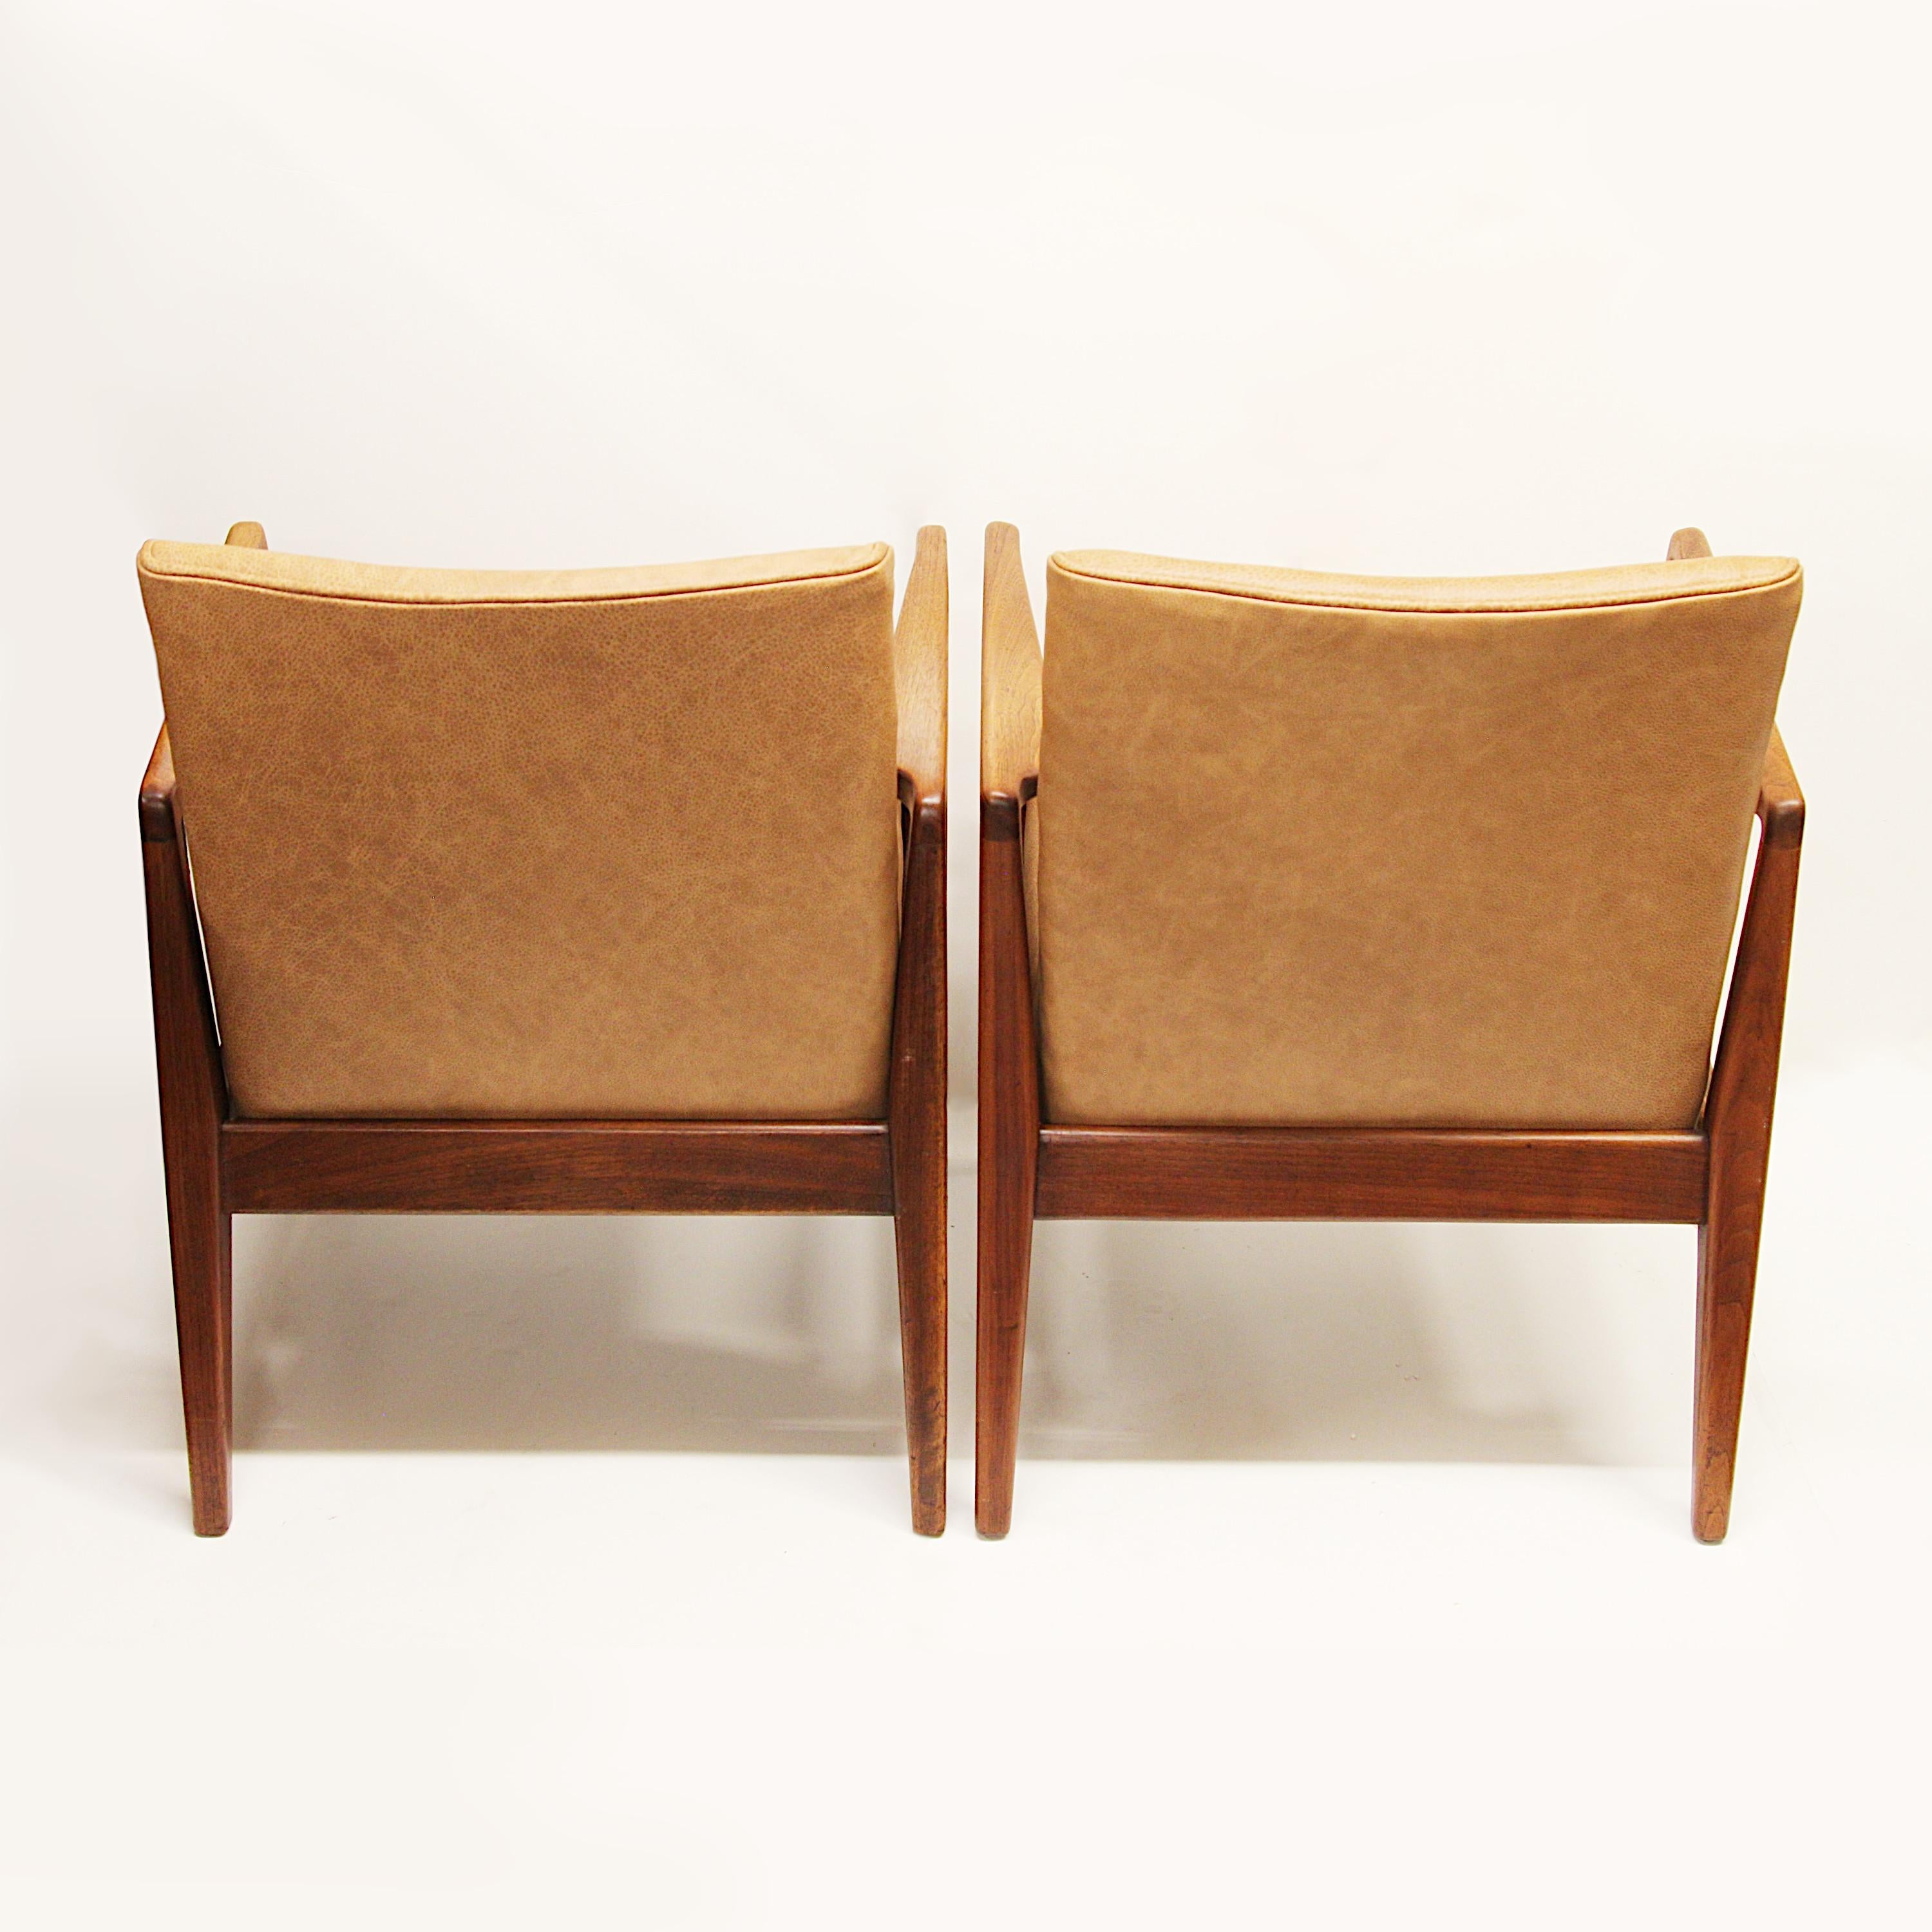 American Pair of Mid-Century Modern Model C-120 Leather & Walnut Armchairs by Jens Risom